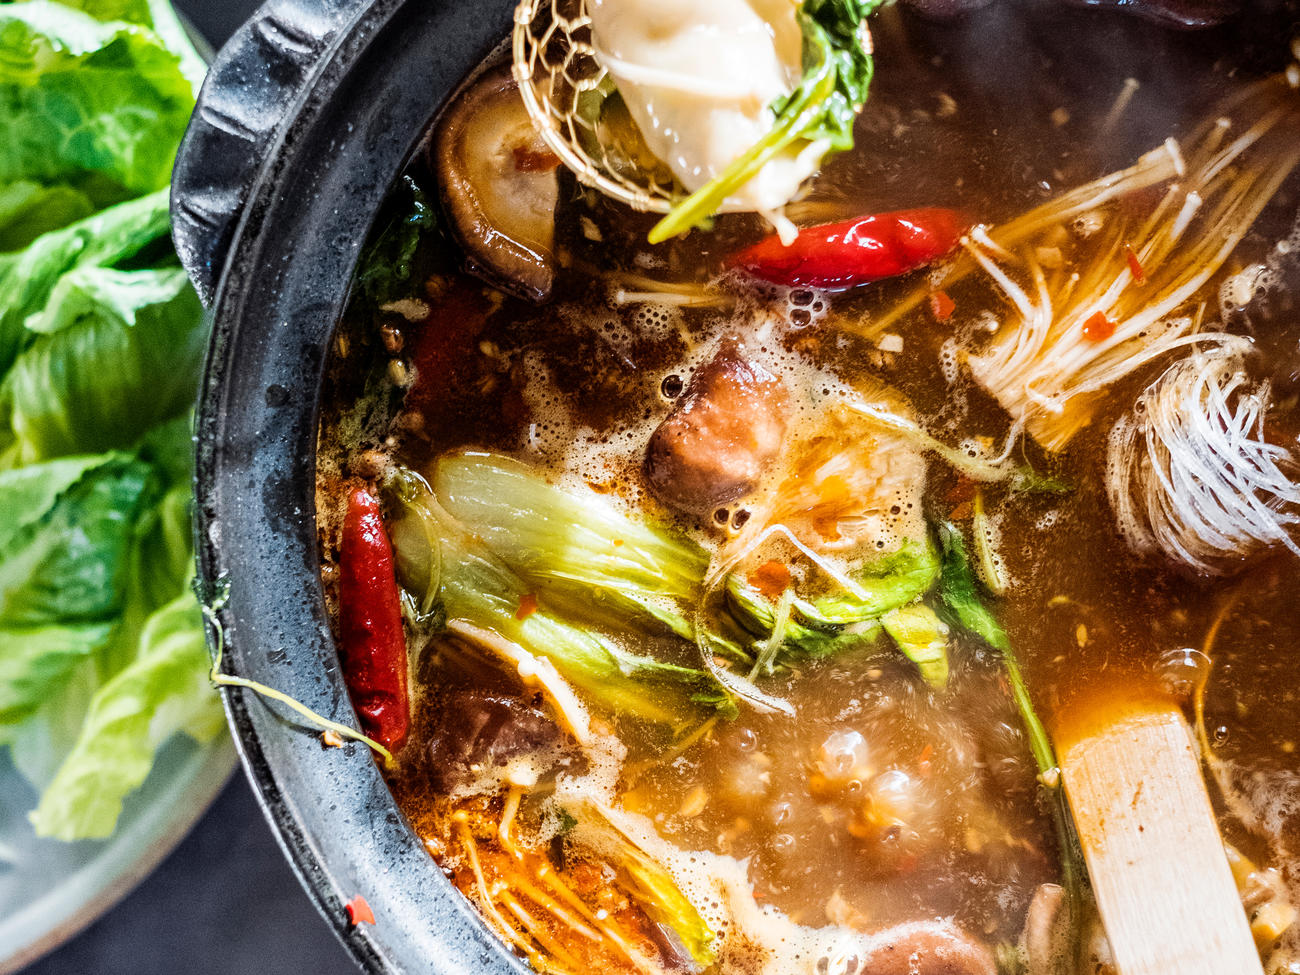 https://img.sunset02.com/sites/default/files/styles/marquee_large_2x/public/1515196442/spicy-sichuan-broth-sun-0218.jpg